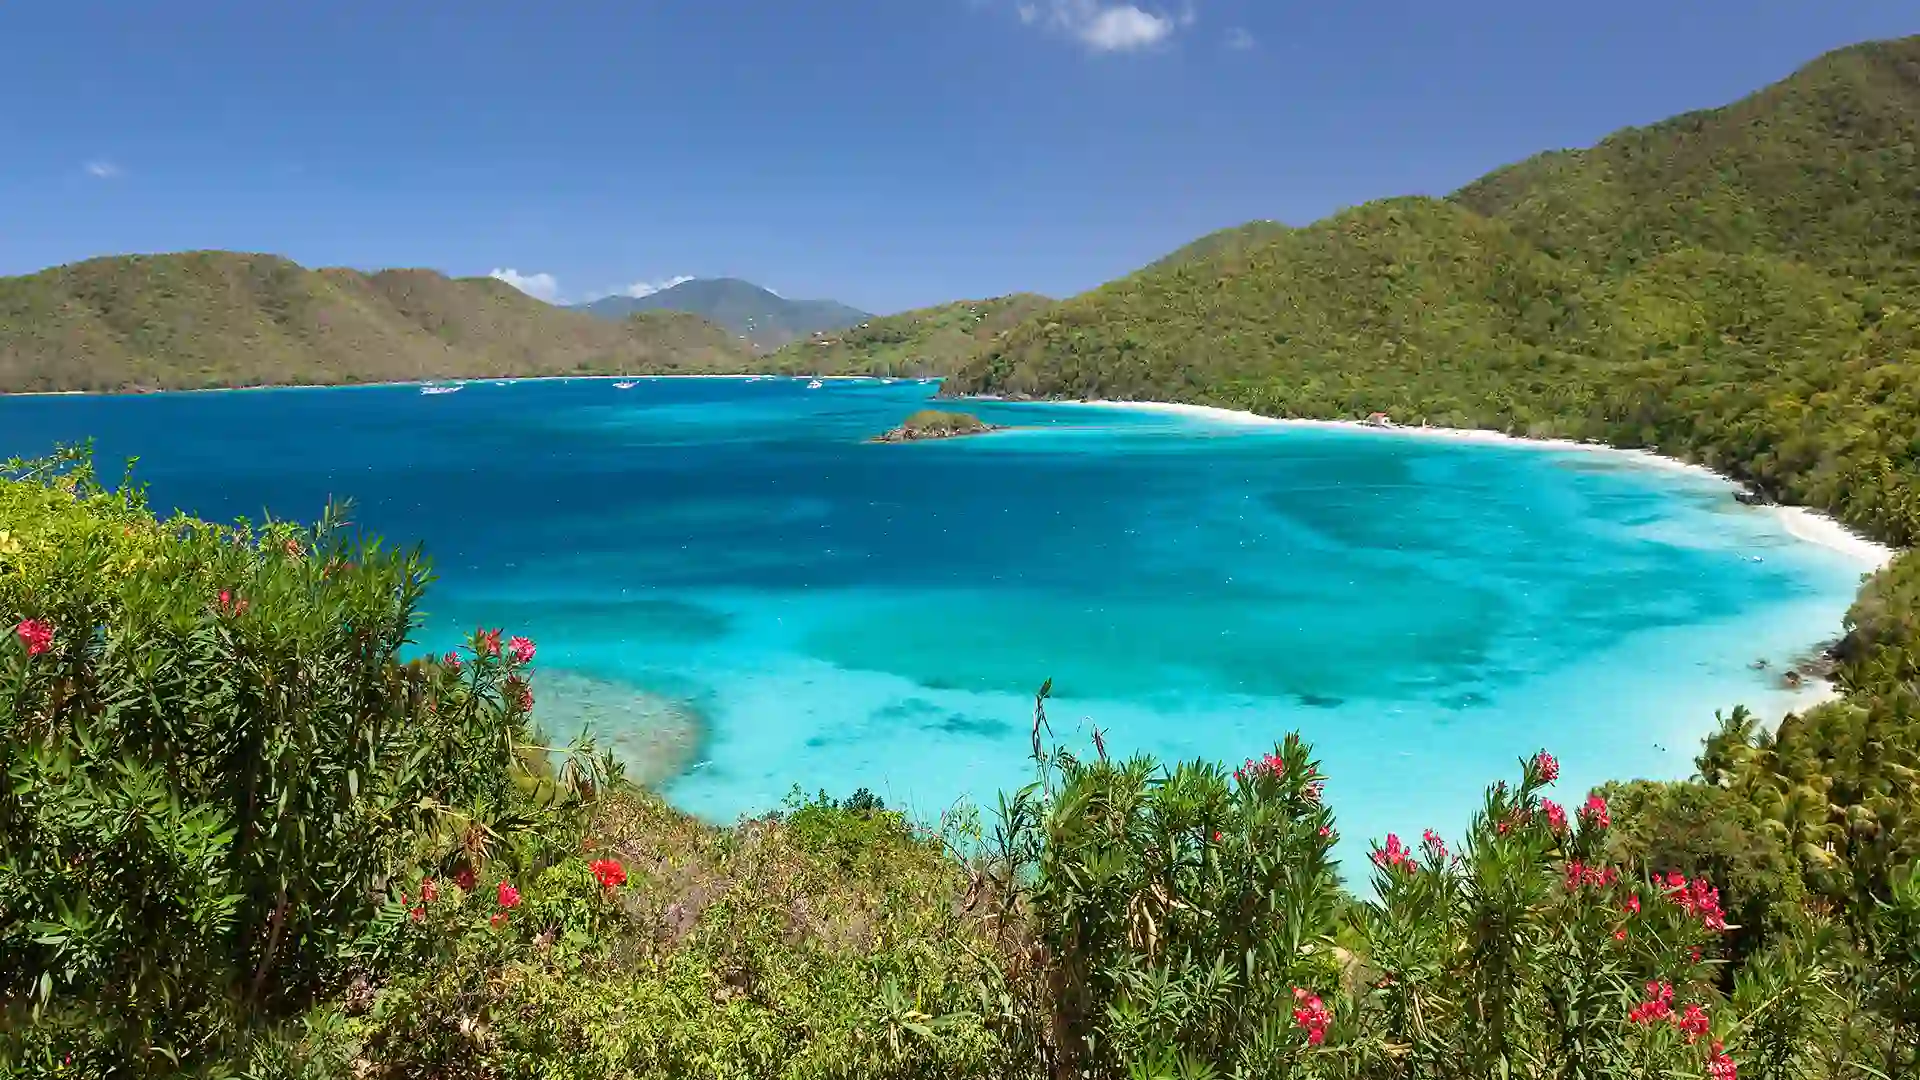 View of Cinnamon Bay, with its turquoise waters and lush green landscape along the white sandy shore.